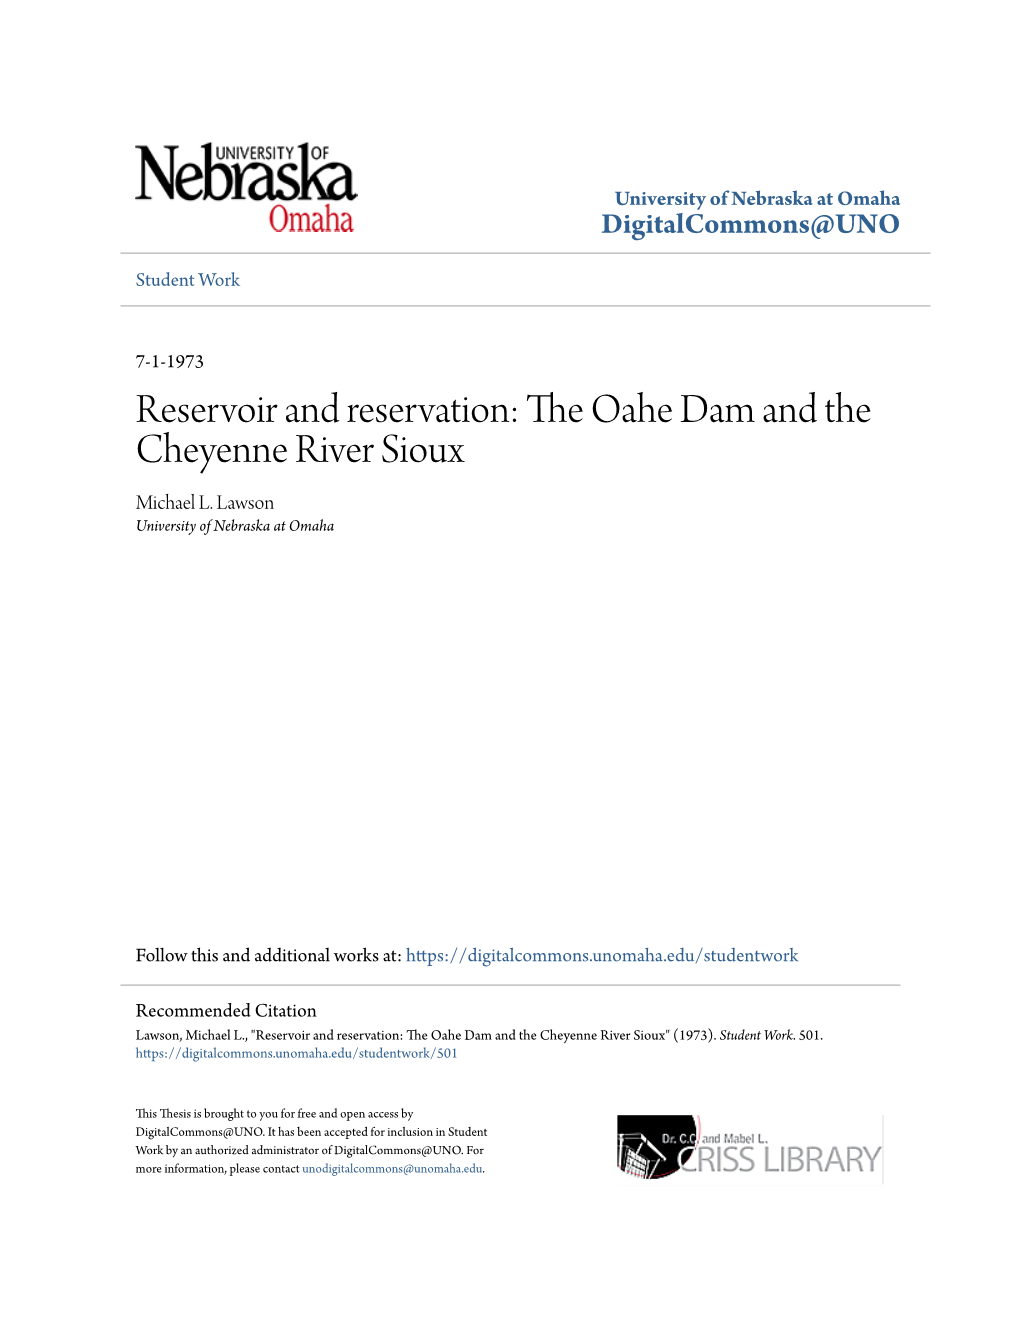 Reservoir and Reservation: the Oahe Dam and the Cheyenne River Sioux